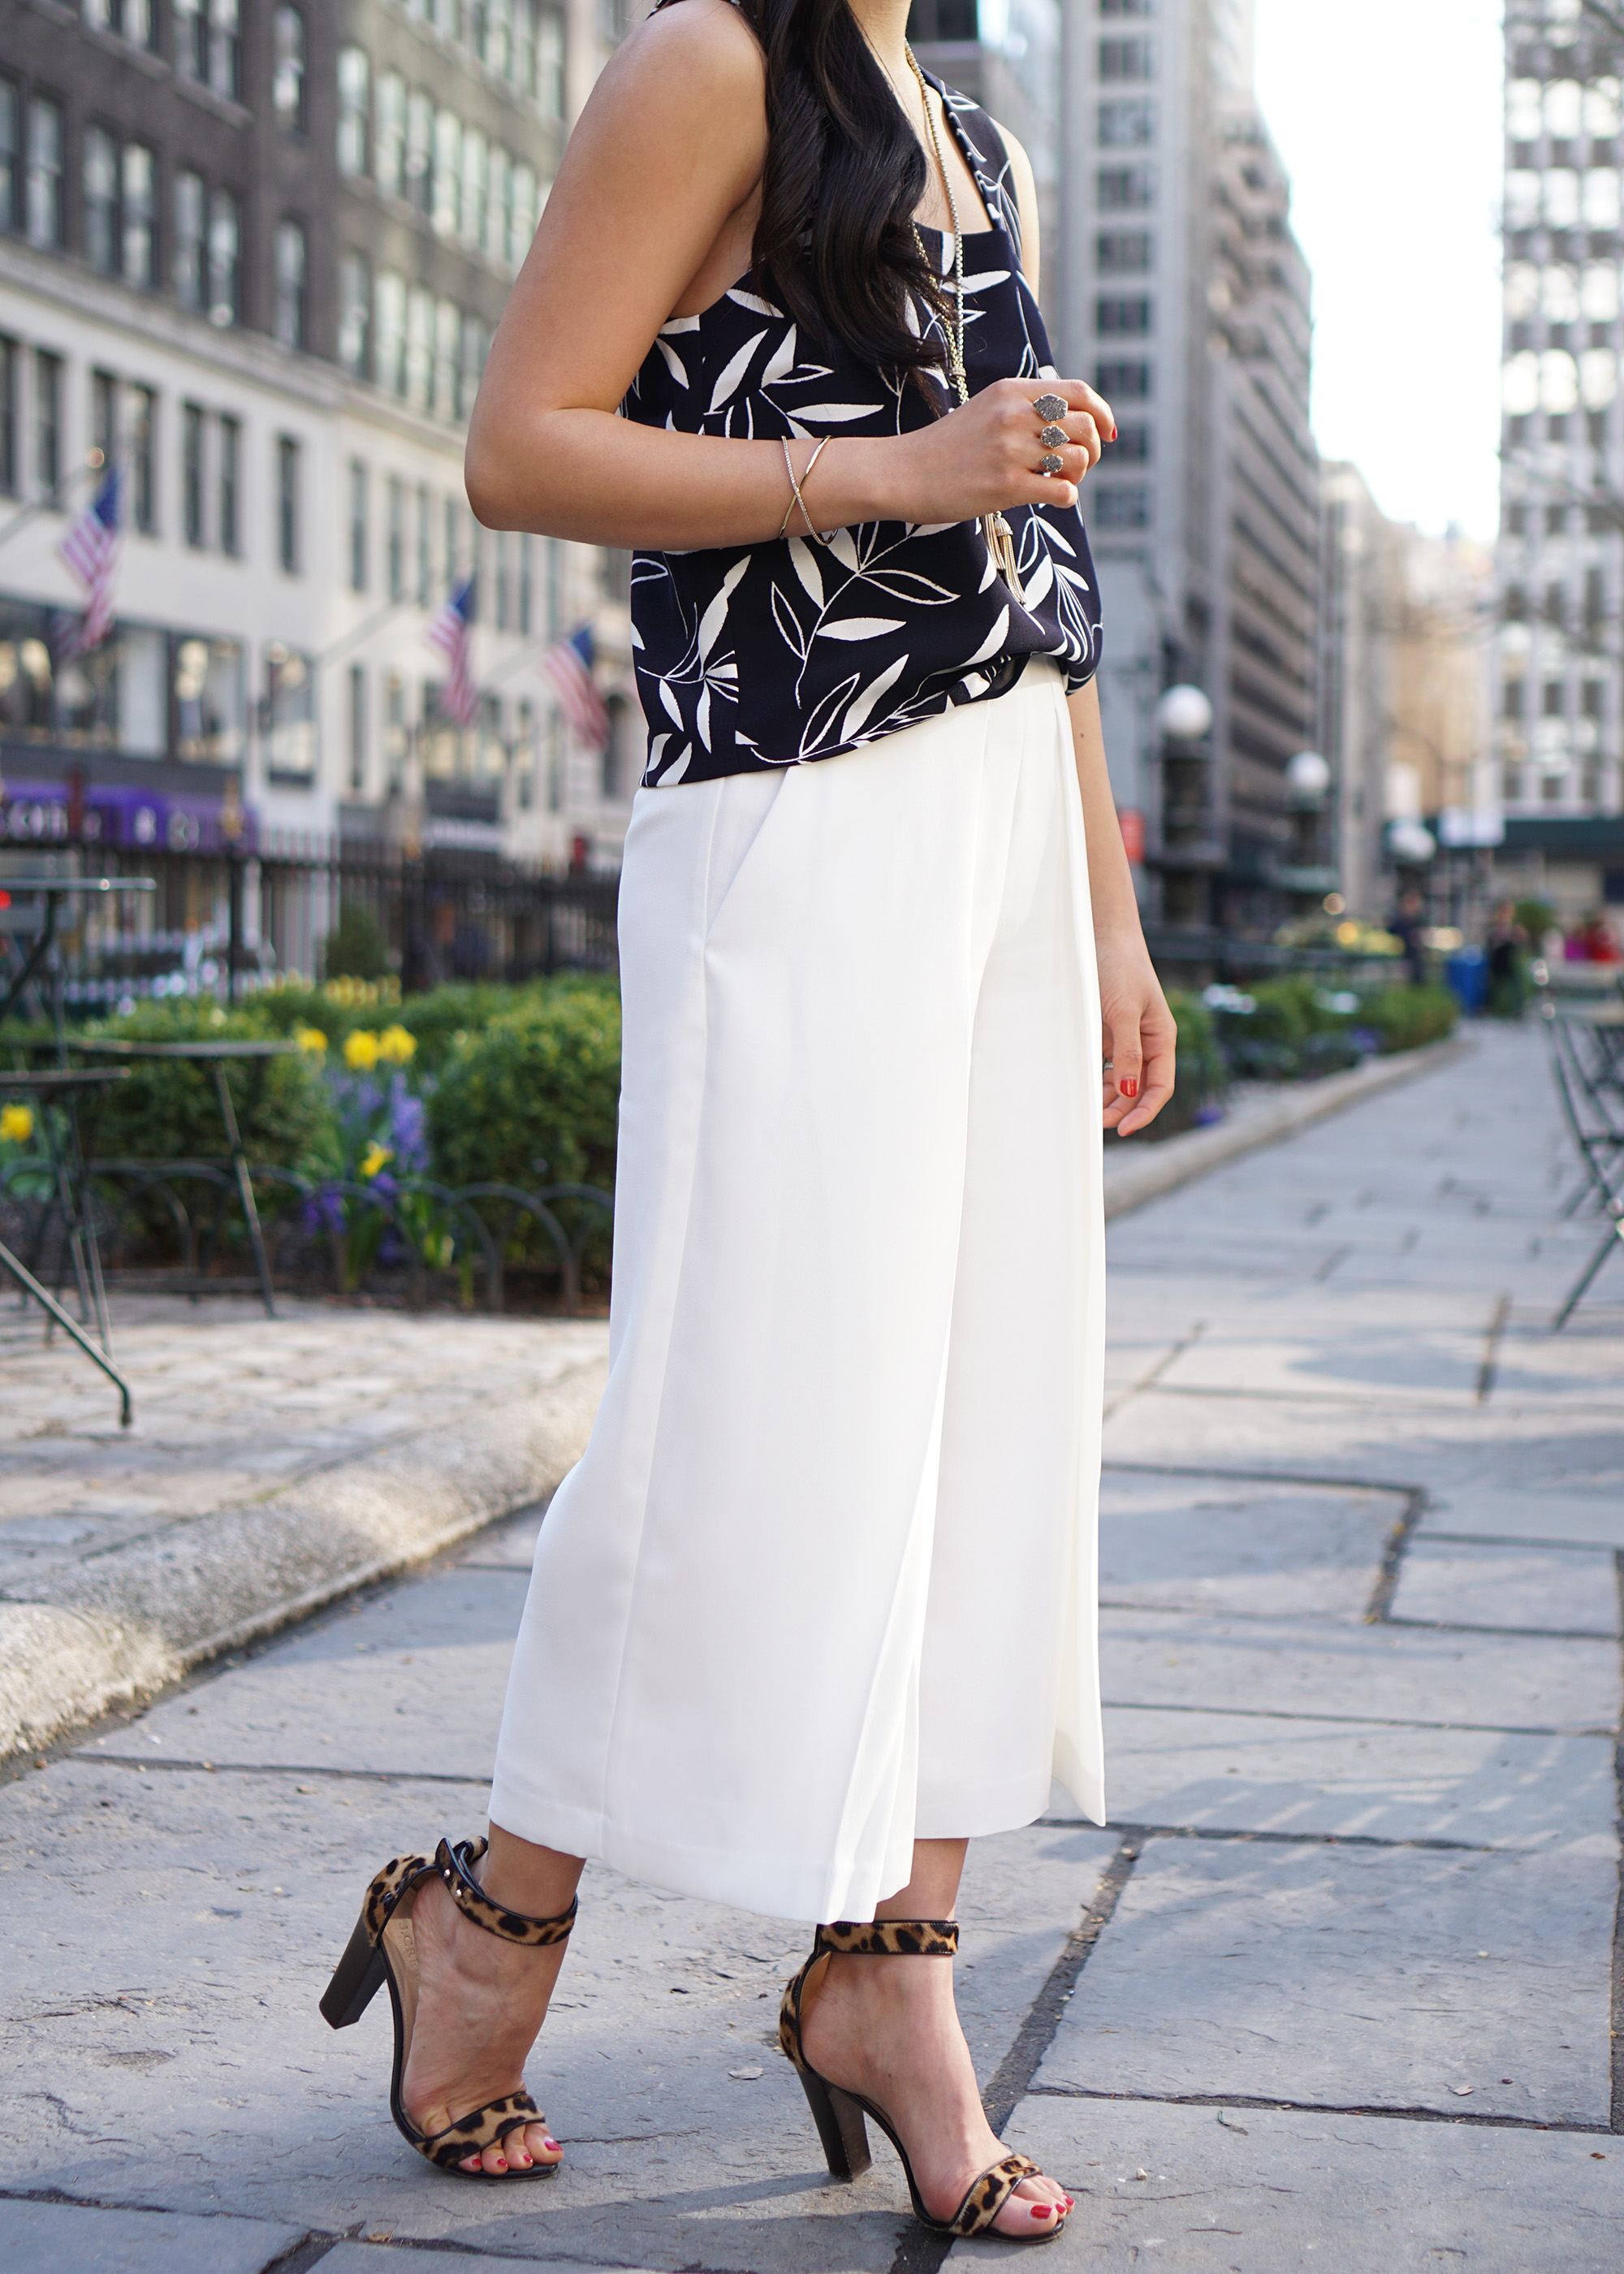 How to Wear Culotte Pants – Skirt The Rules